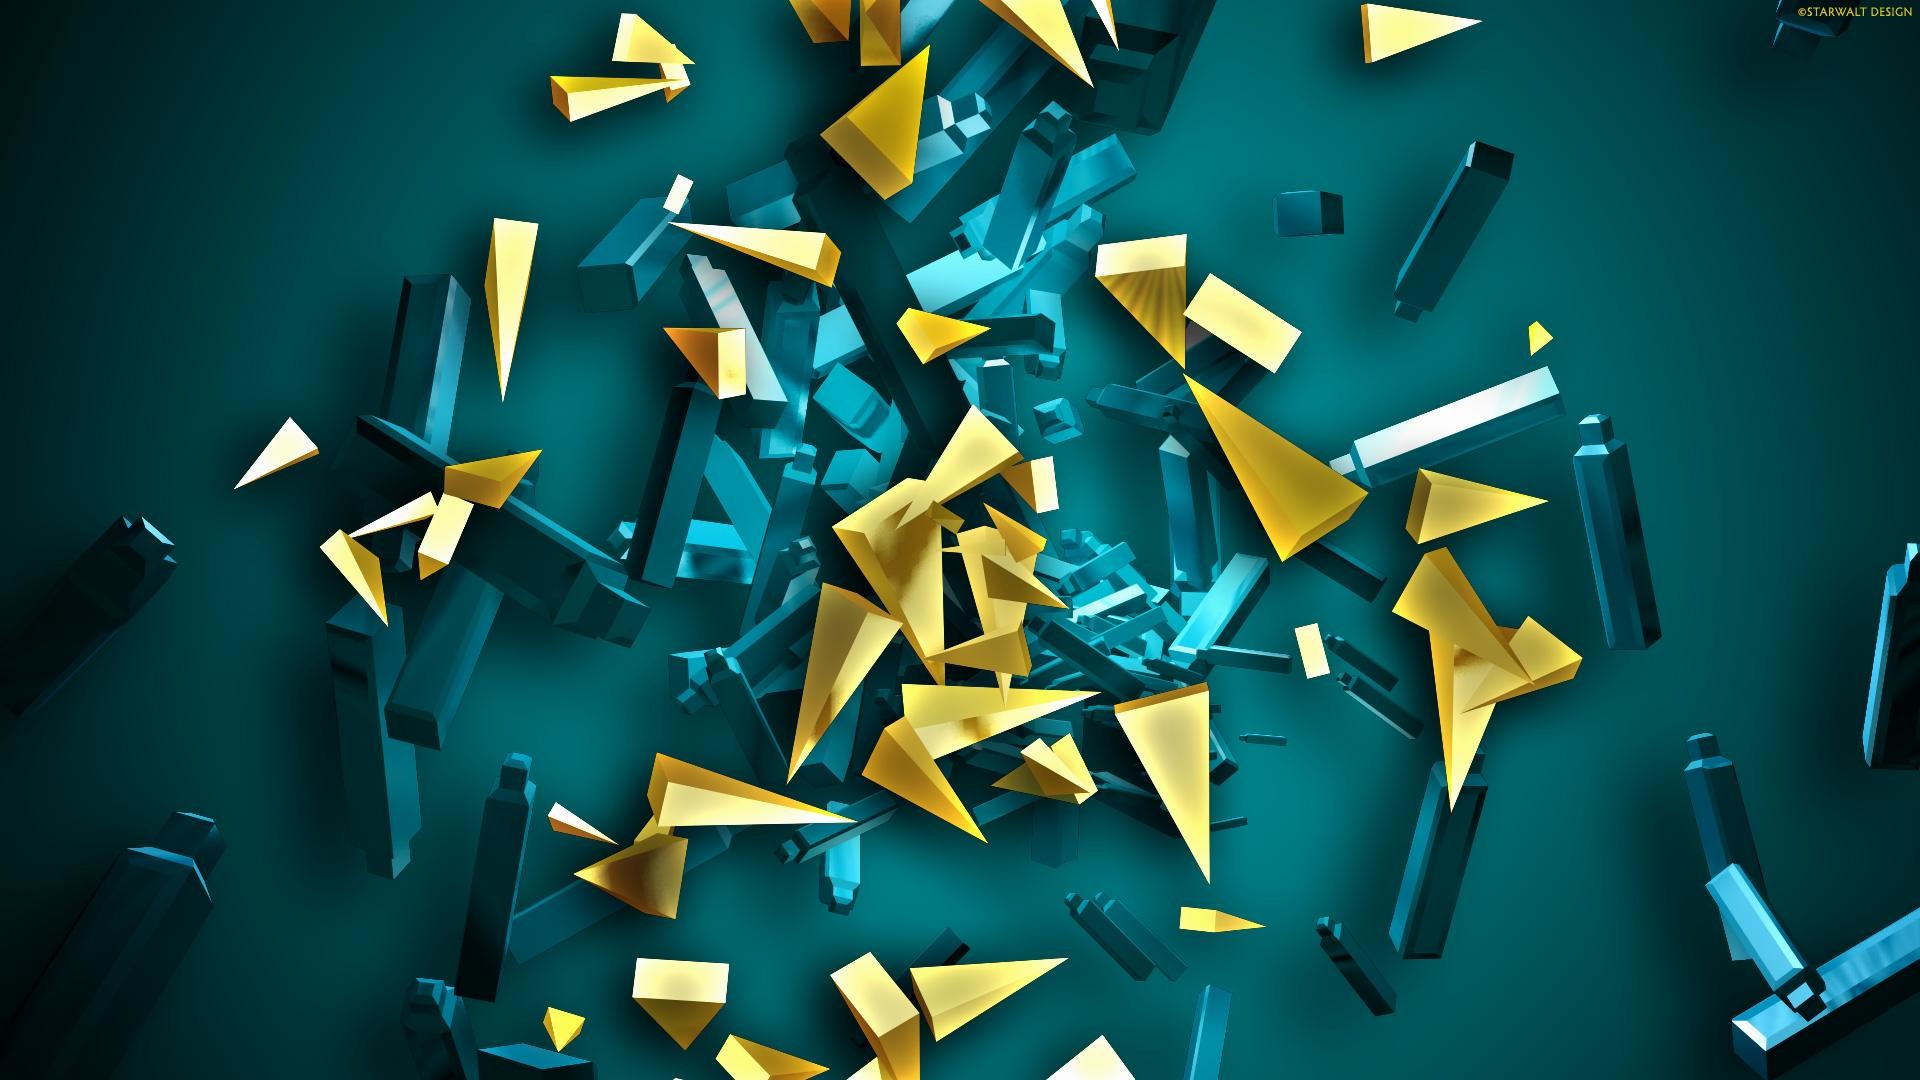 Abstract 3d Geometric Shapes Background - Abstract High Resolution  Background - 1920x1080 Wallpaper 